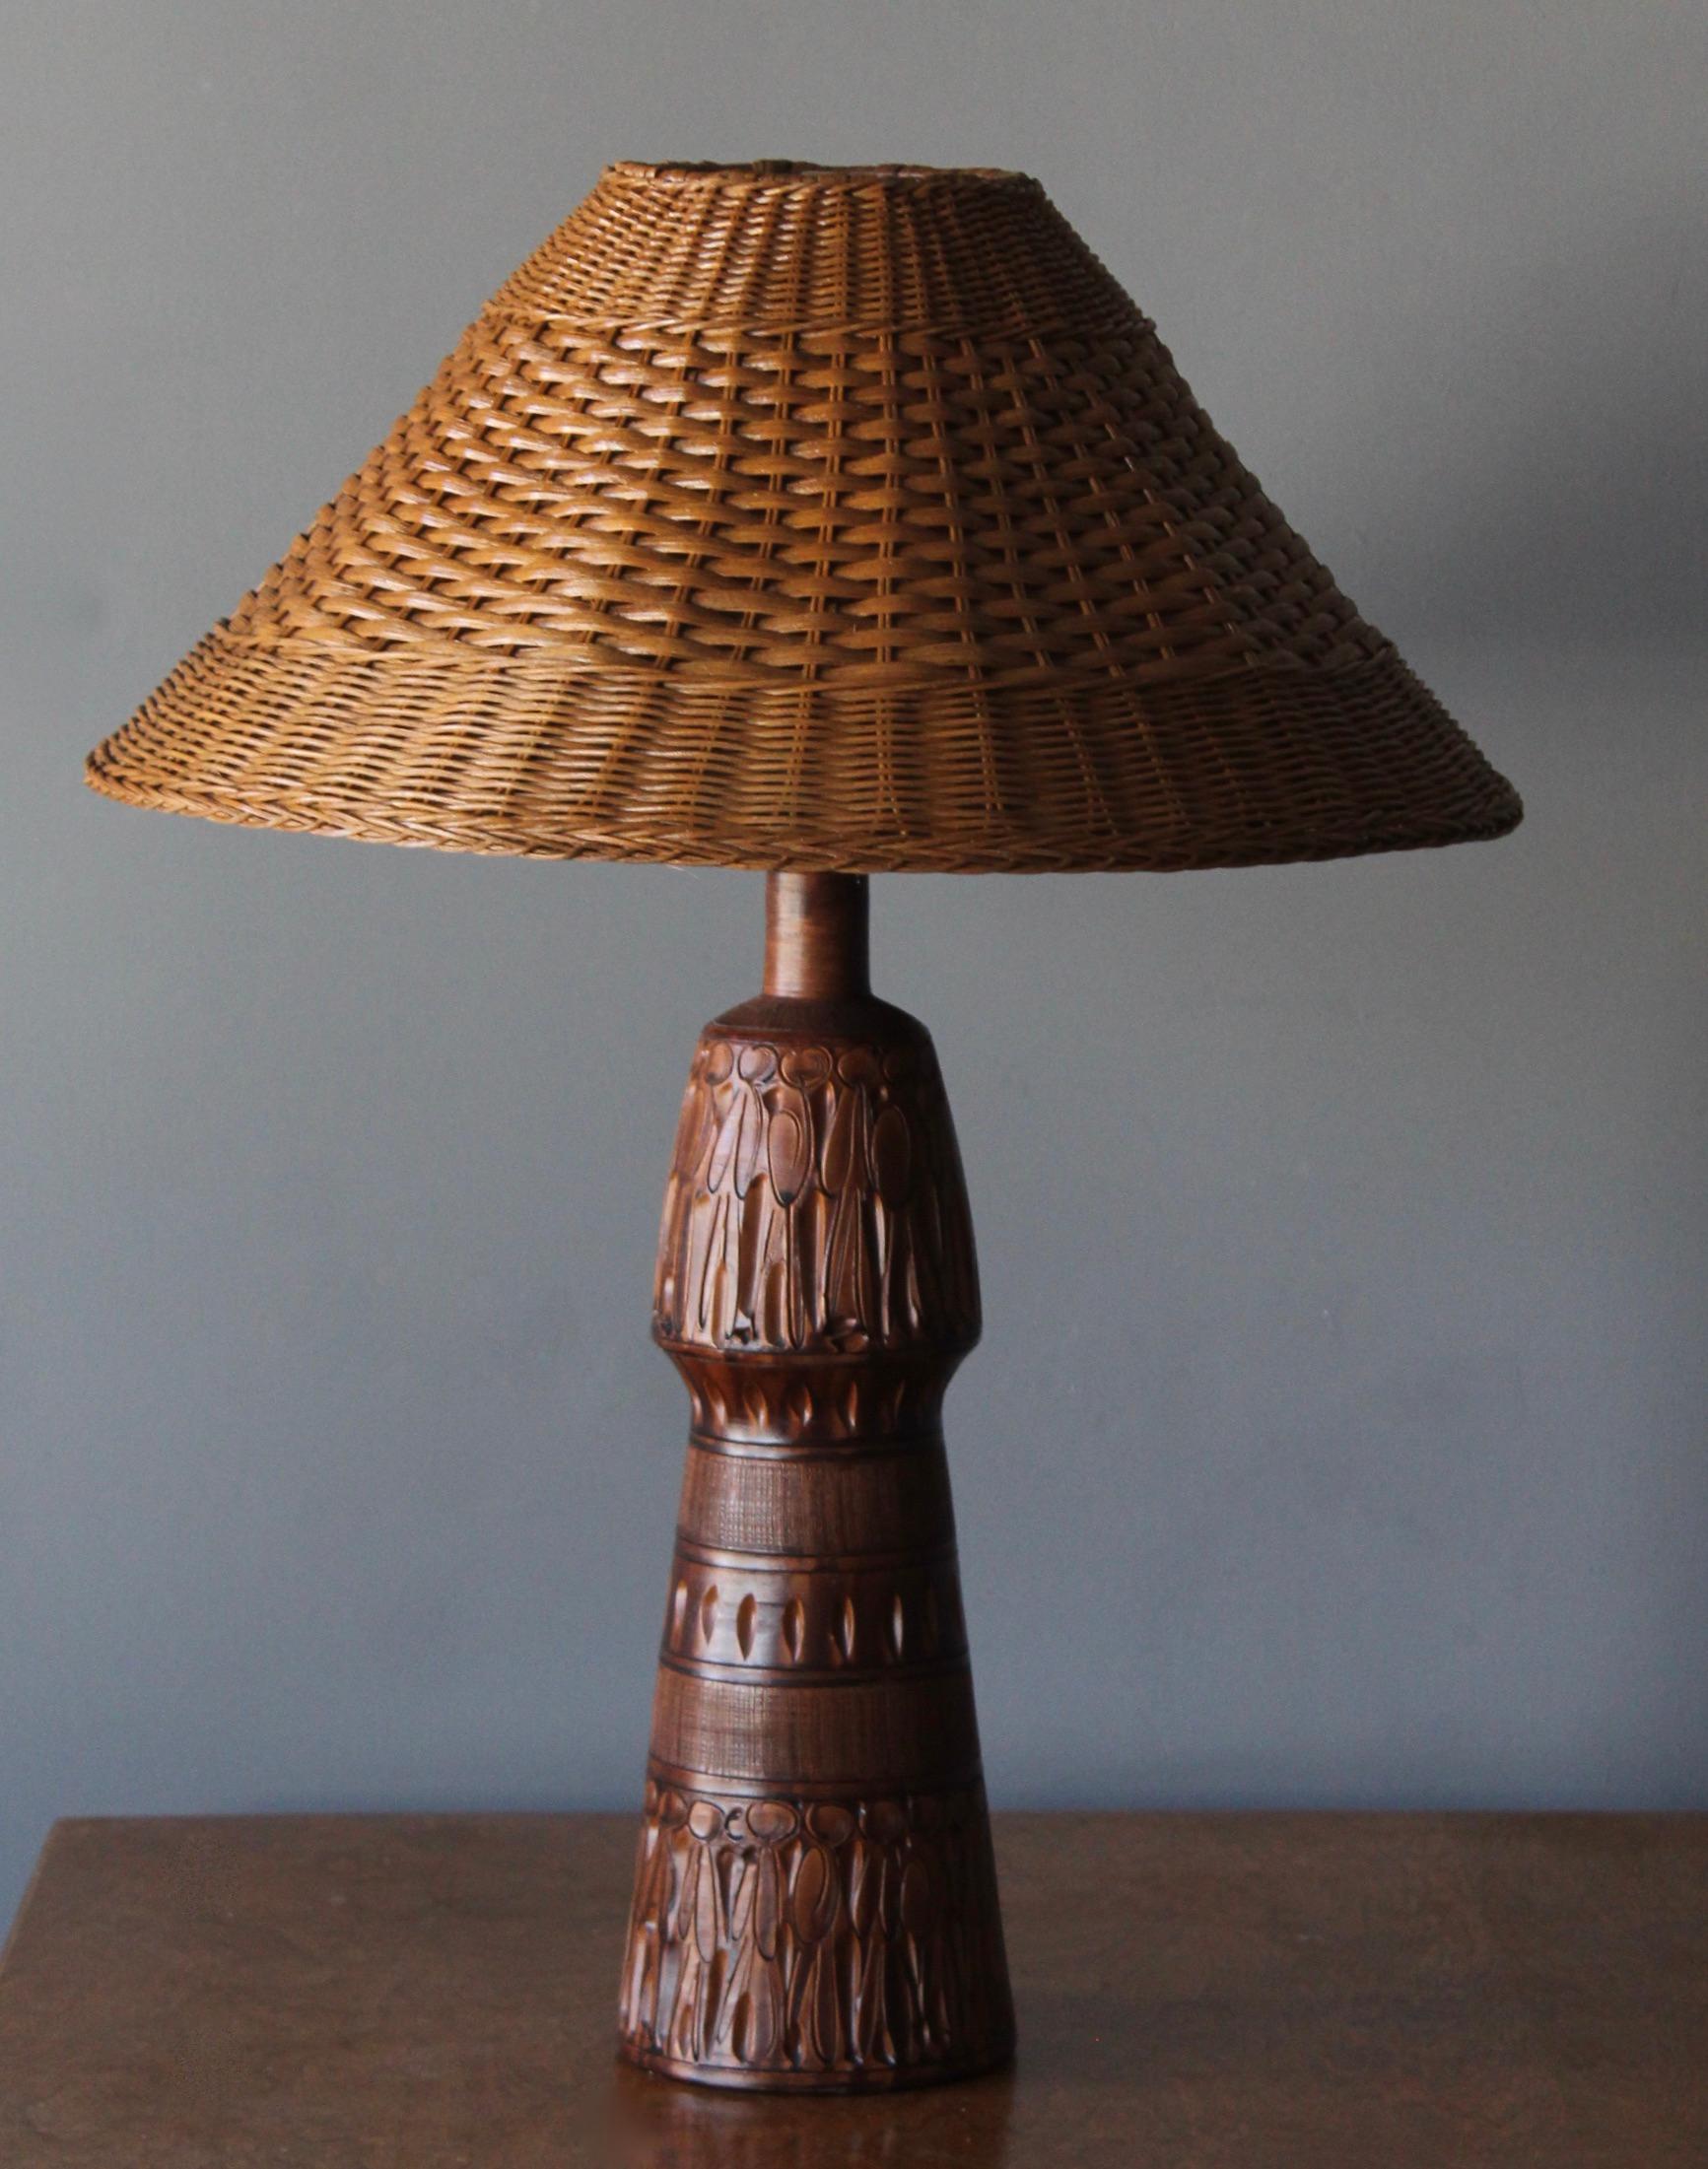 A sizable sculptural table lamp, designed and produced in Italy, 1970s. In glazed and incised ceramic. Assorted rattan lampshade.

Stated dimensions include lampshade.

Other designers of the period include Gabriella Crespi, Donald Judd, Max